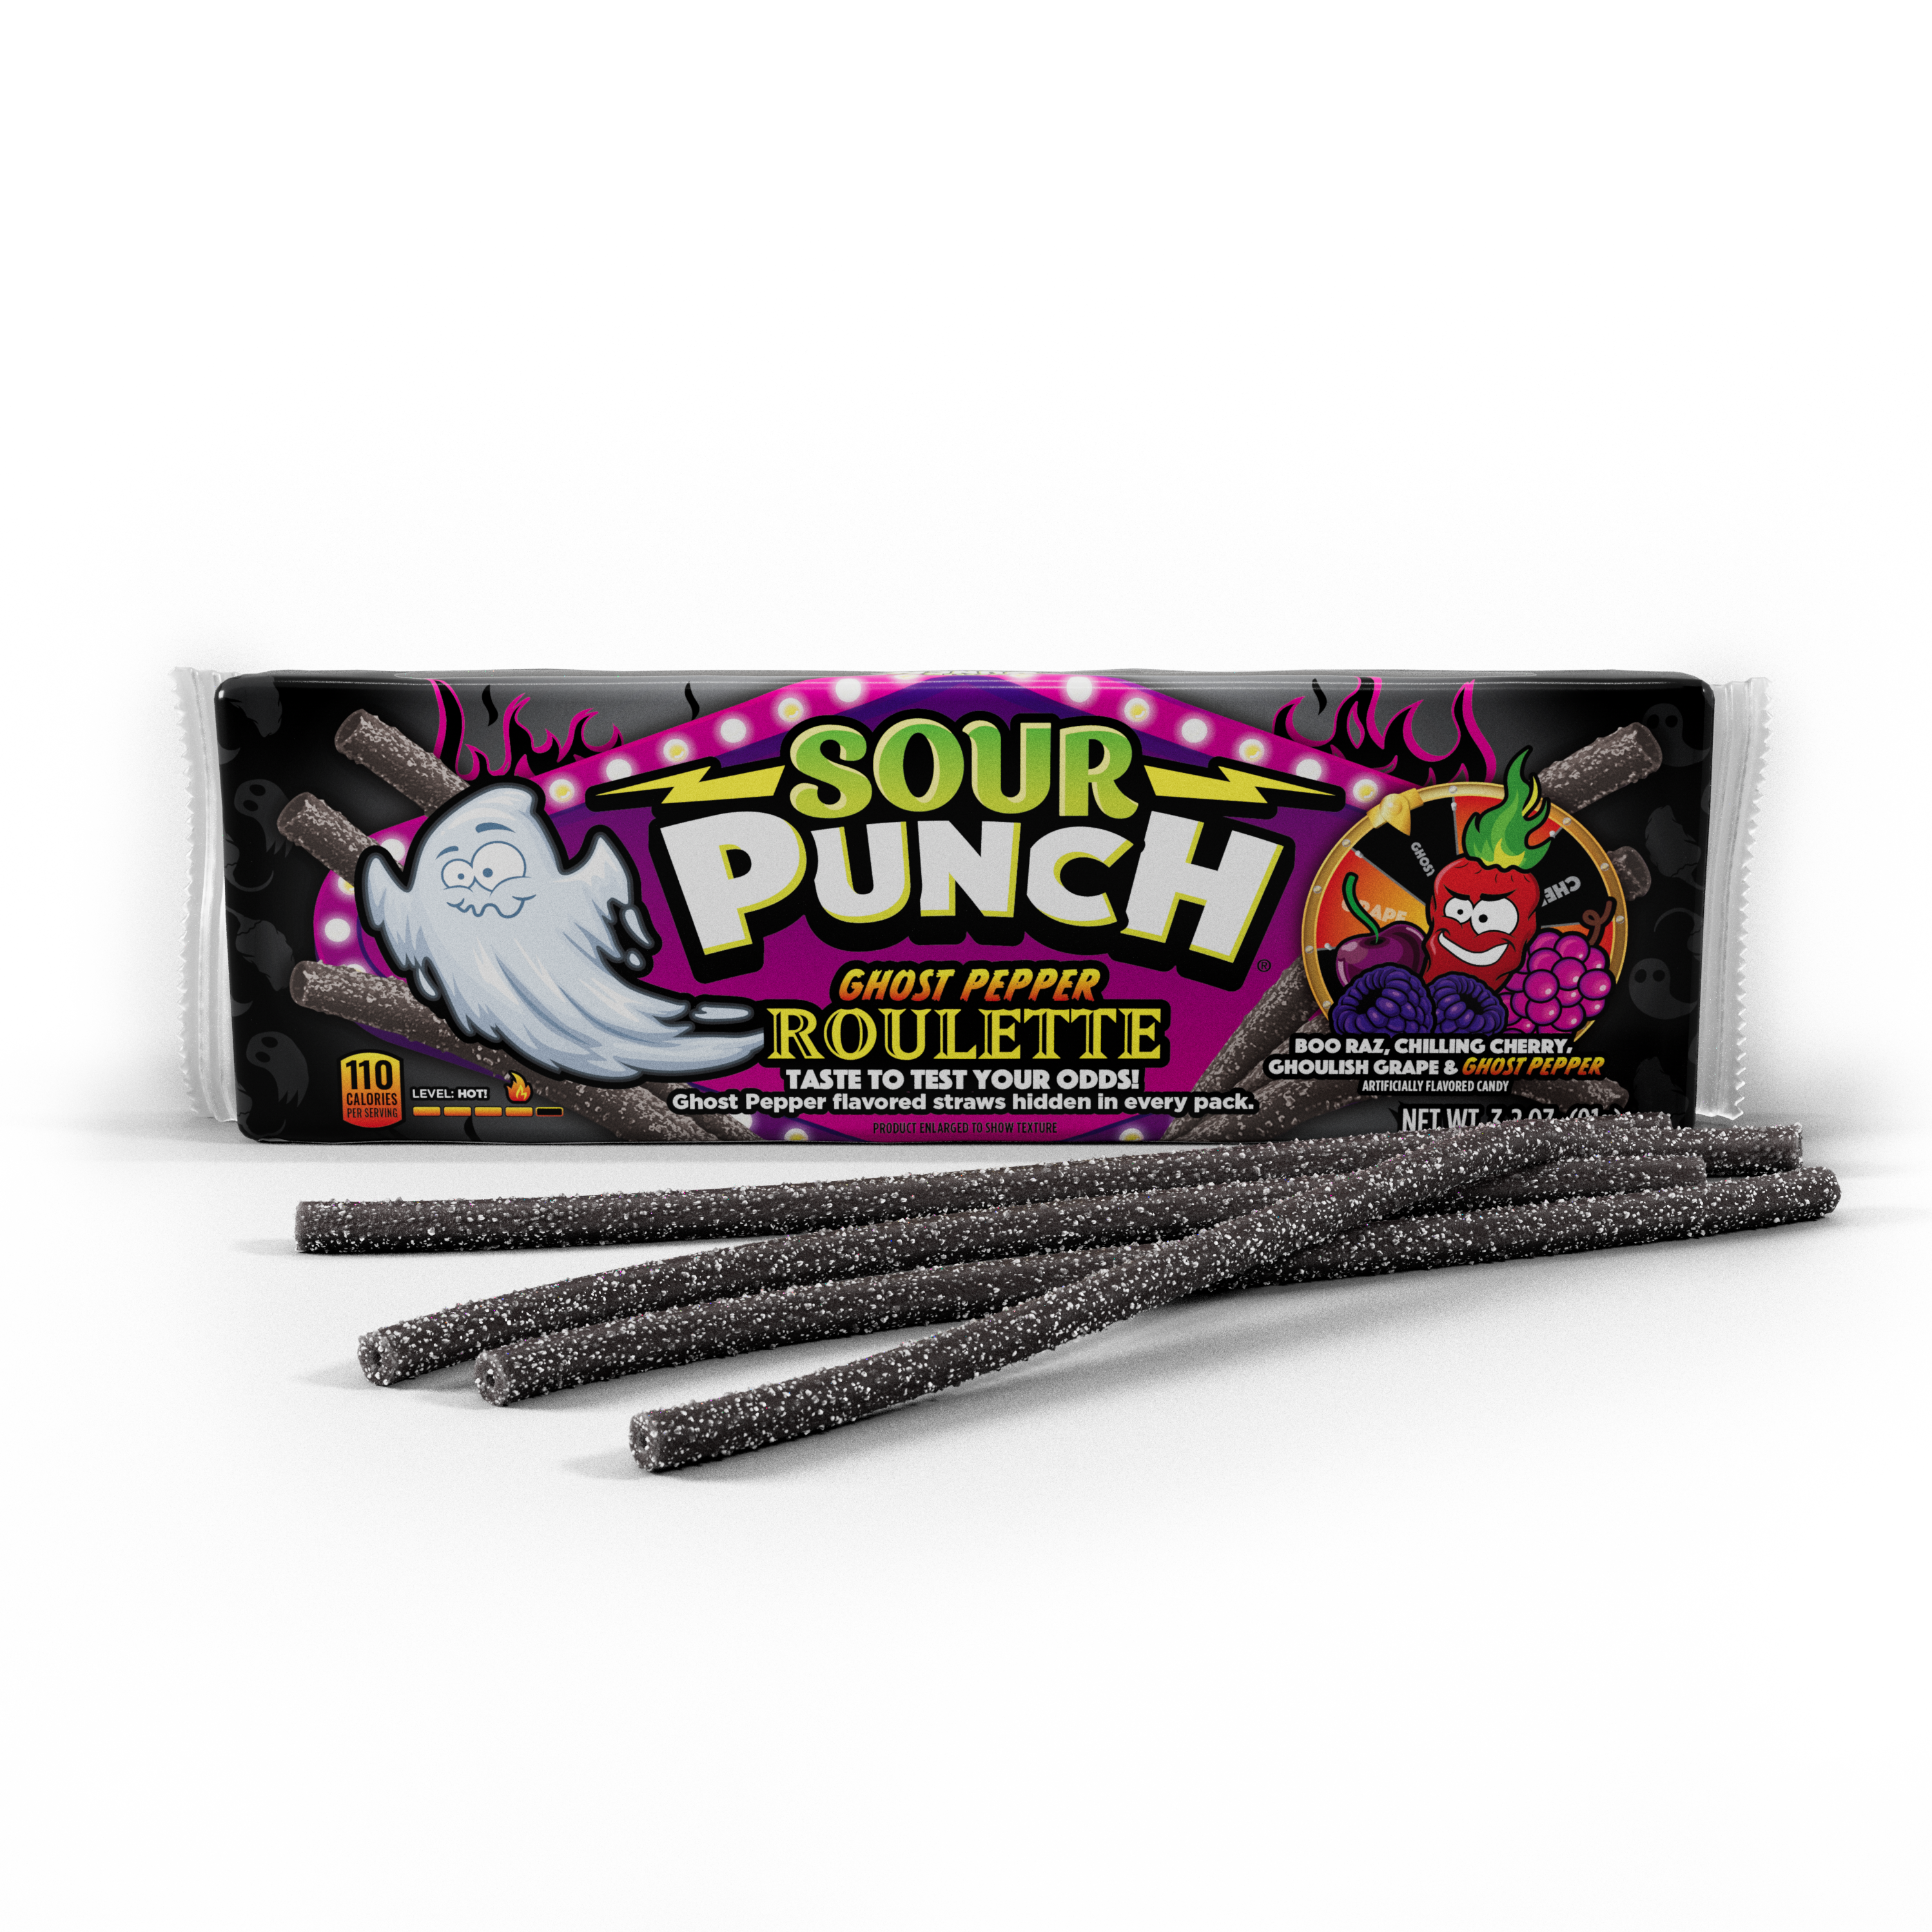 Sour Punch Ghost Pepper Roulette Straws 3.2oz Trays